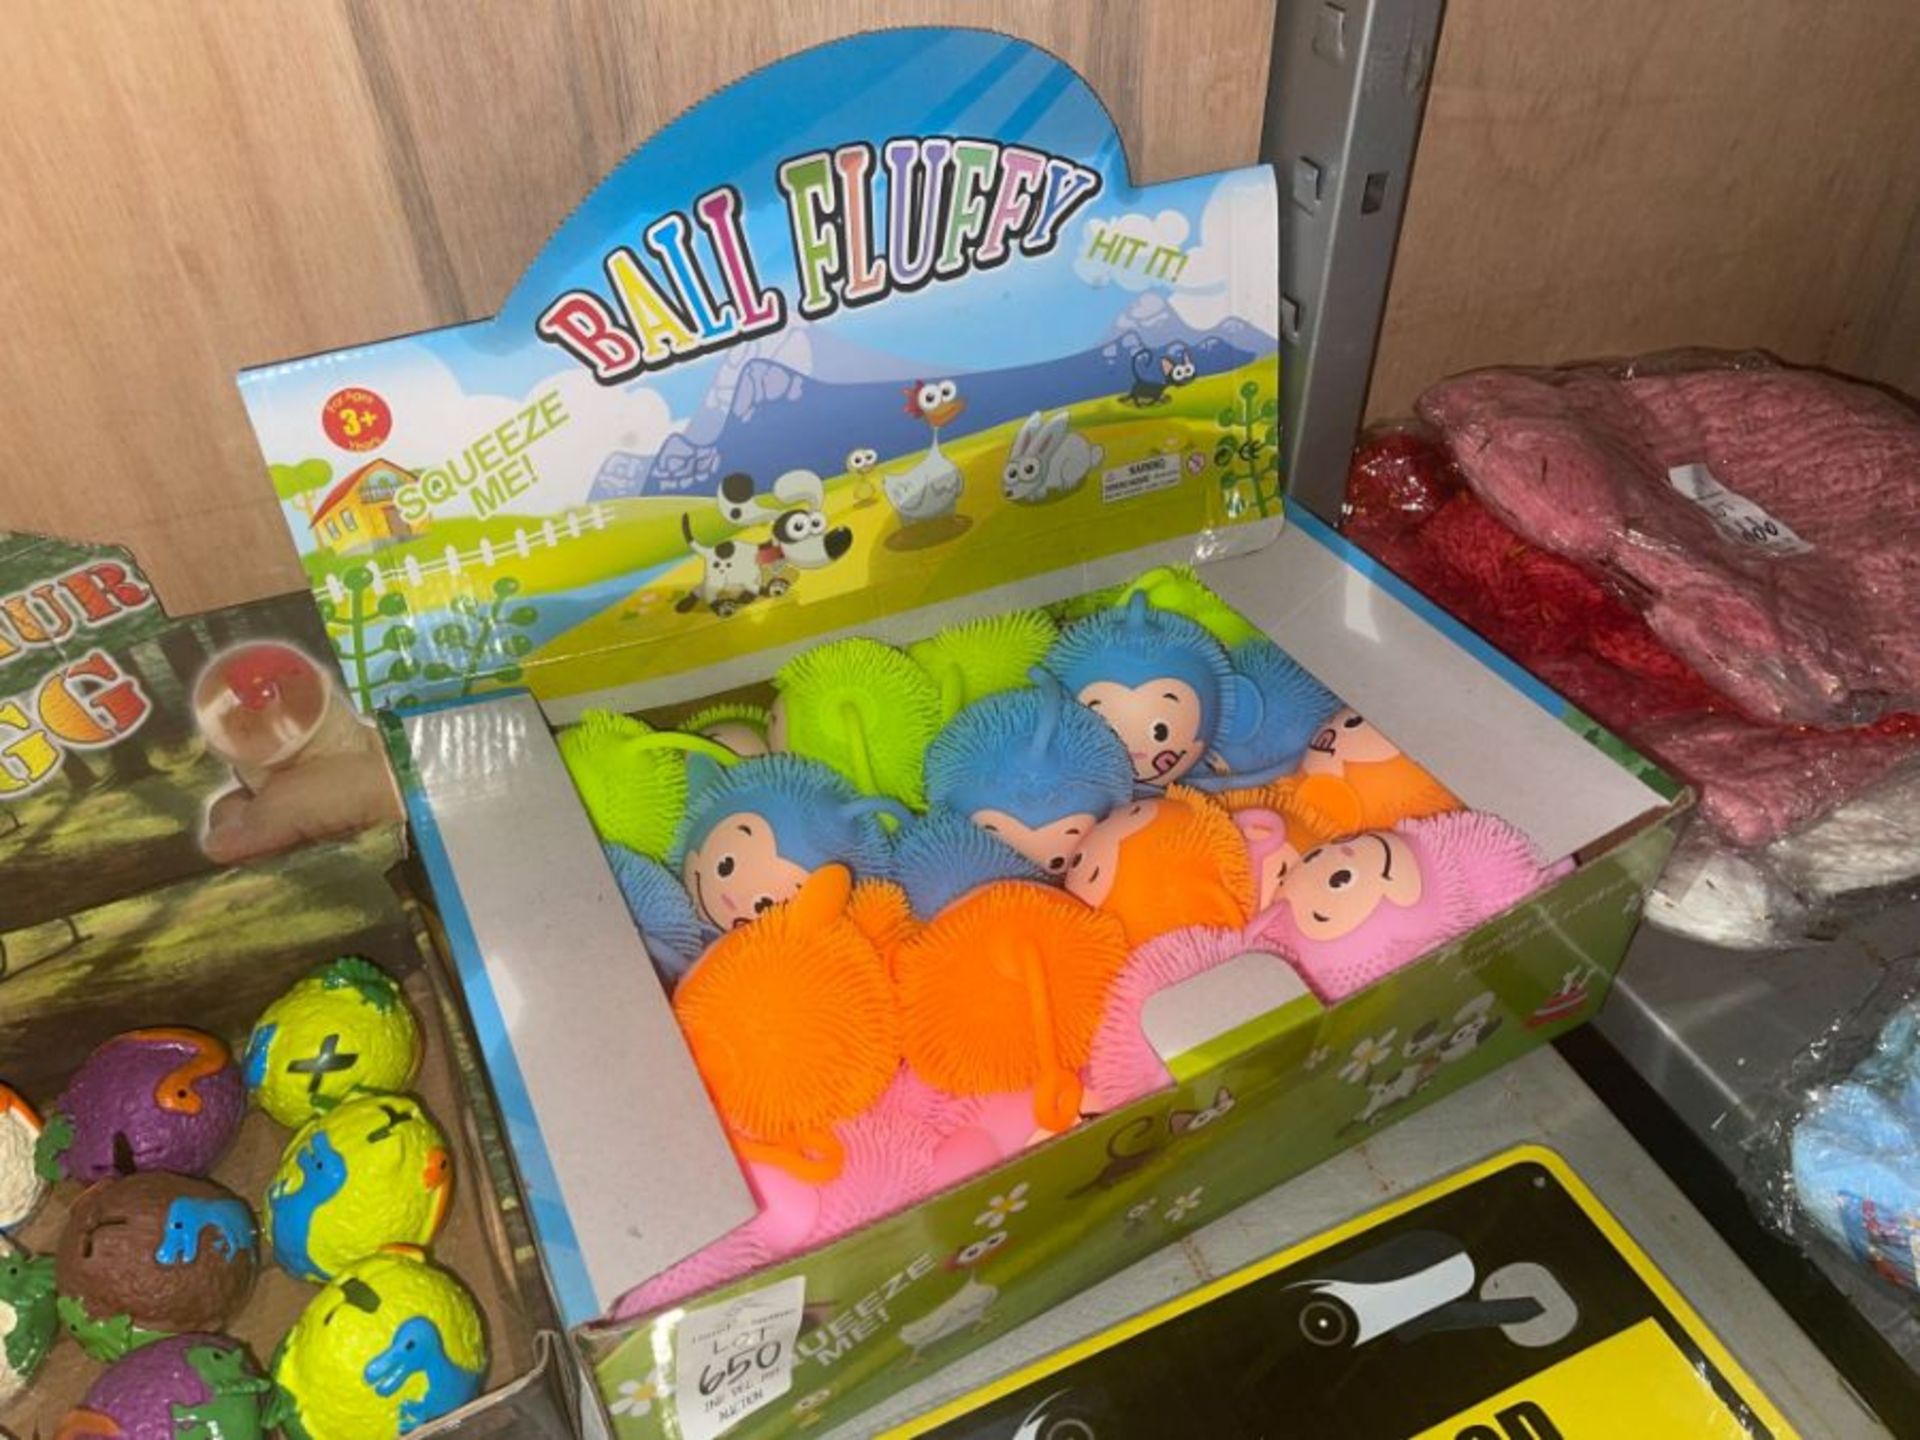 BOX OF SQUEEZY FLUFFY BALLS